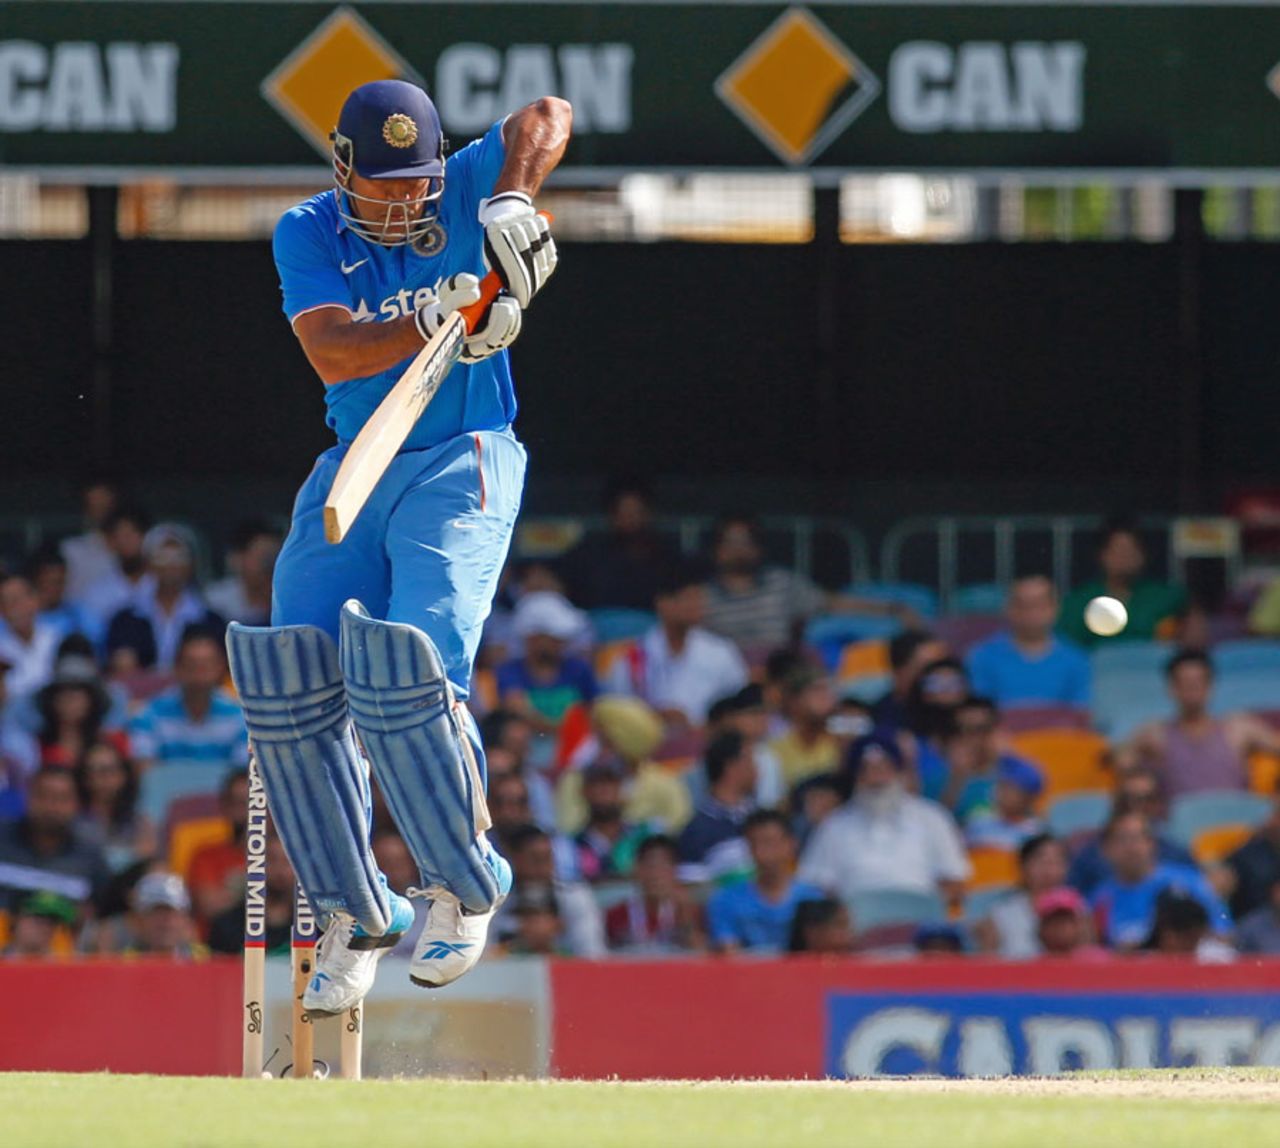 MS Dhoni gets off the ground to fend a delivery, England v India, Carlton Mid Tri-series, Brisbane, January 20, 2015